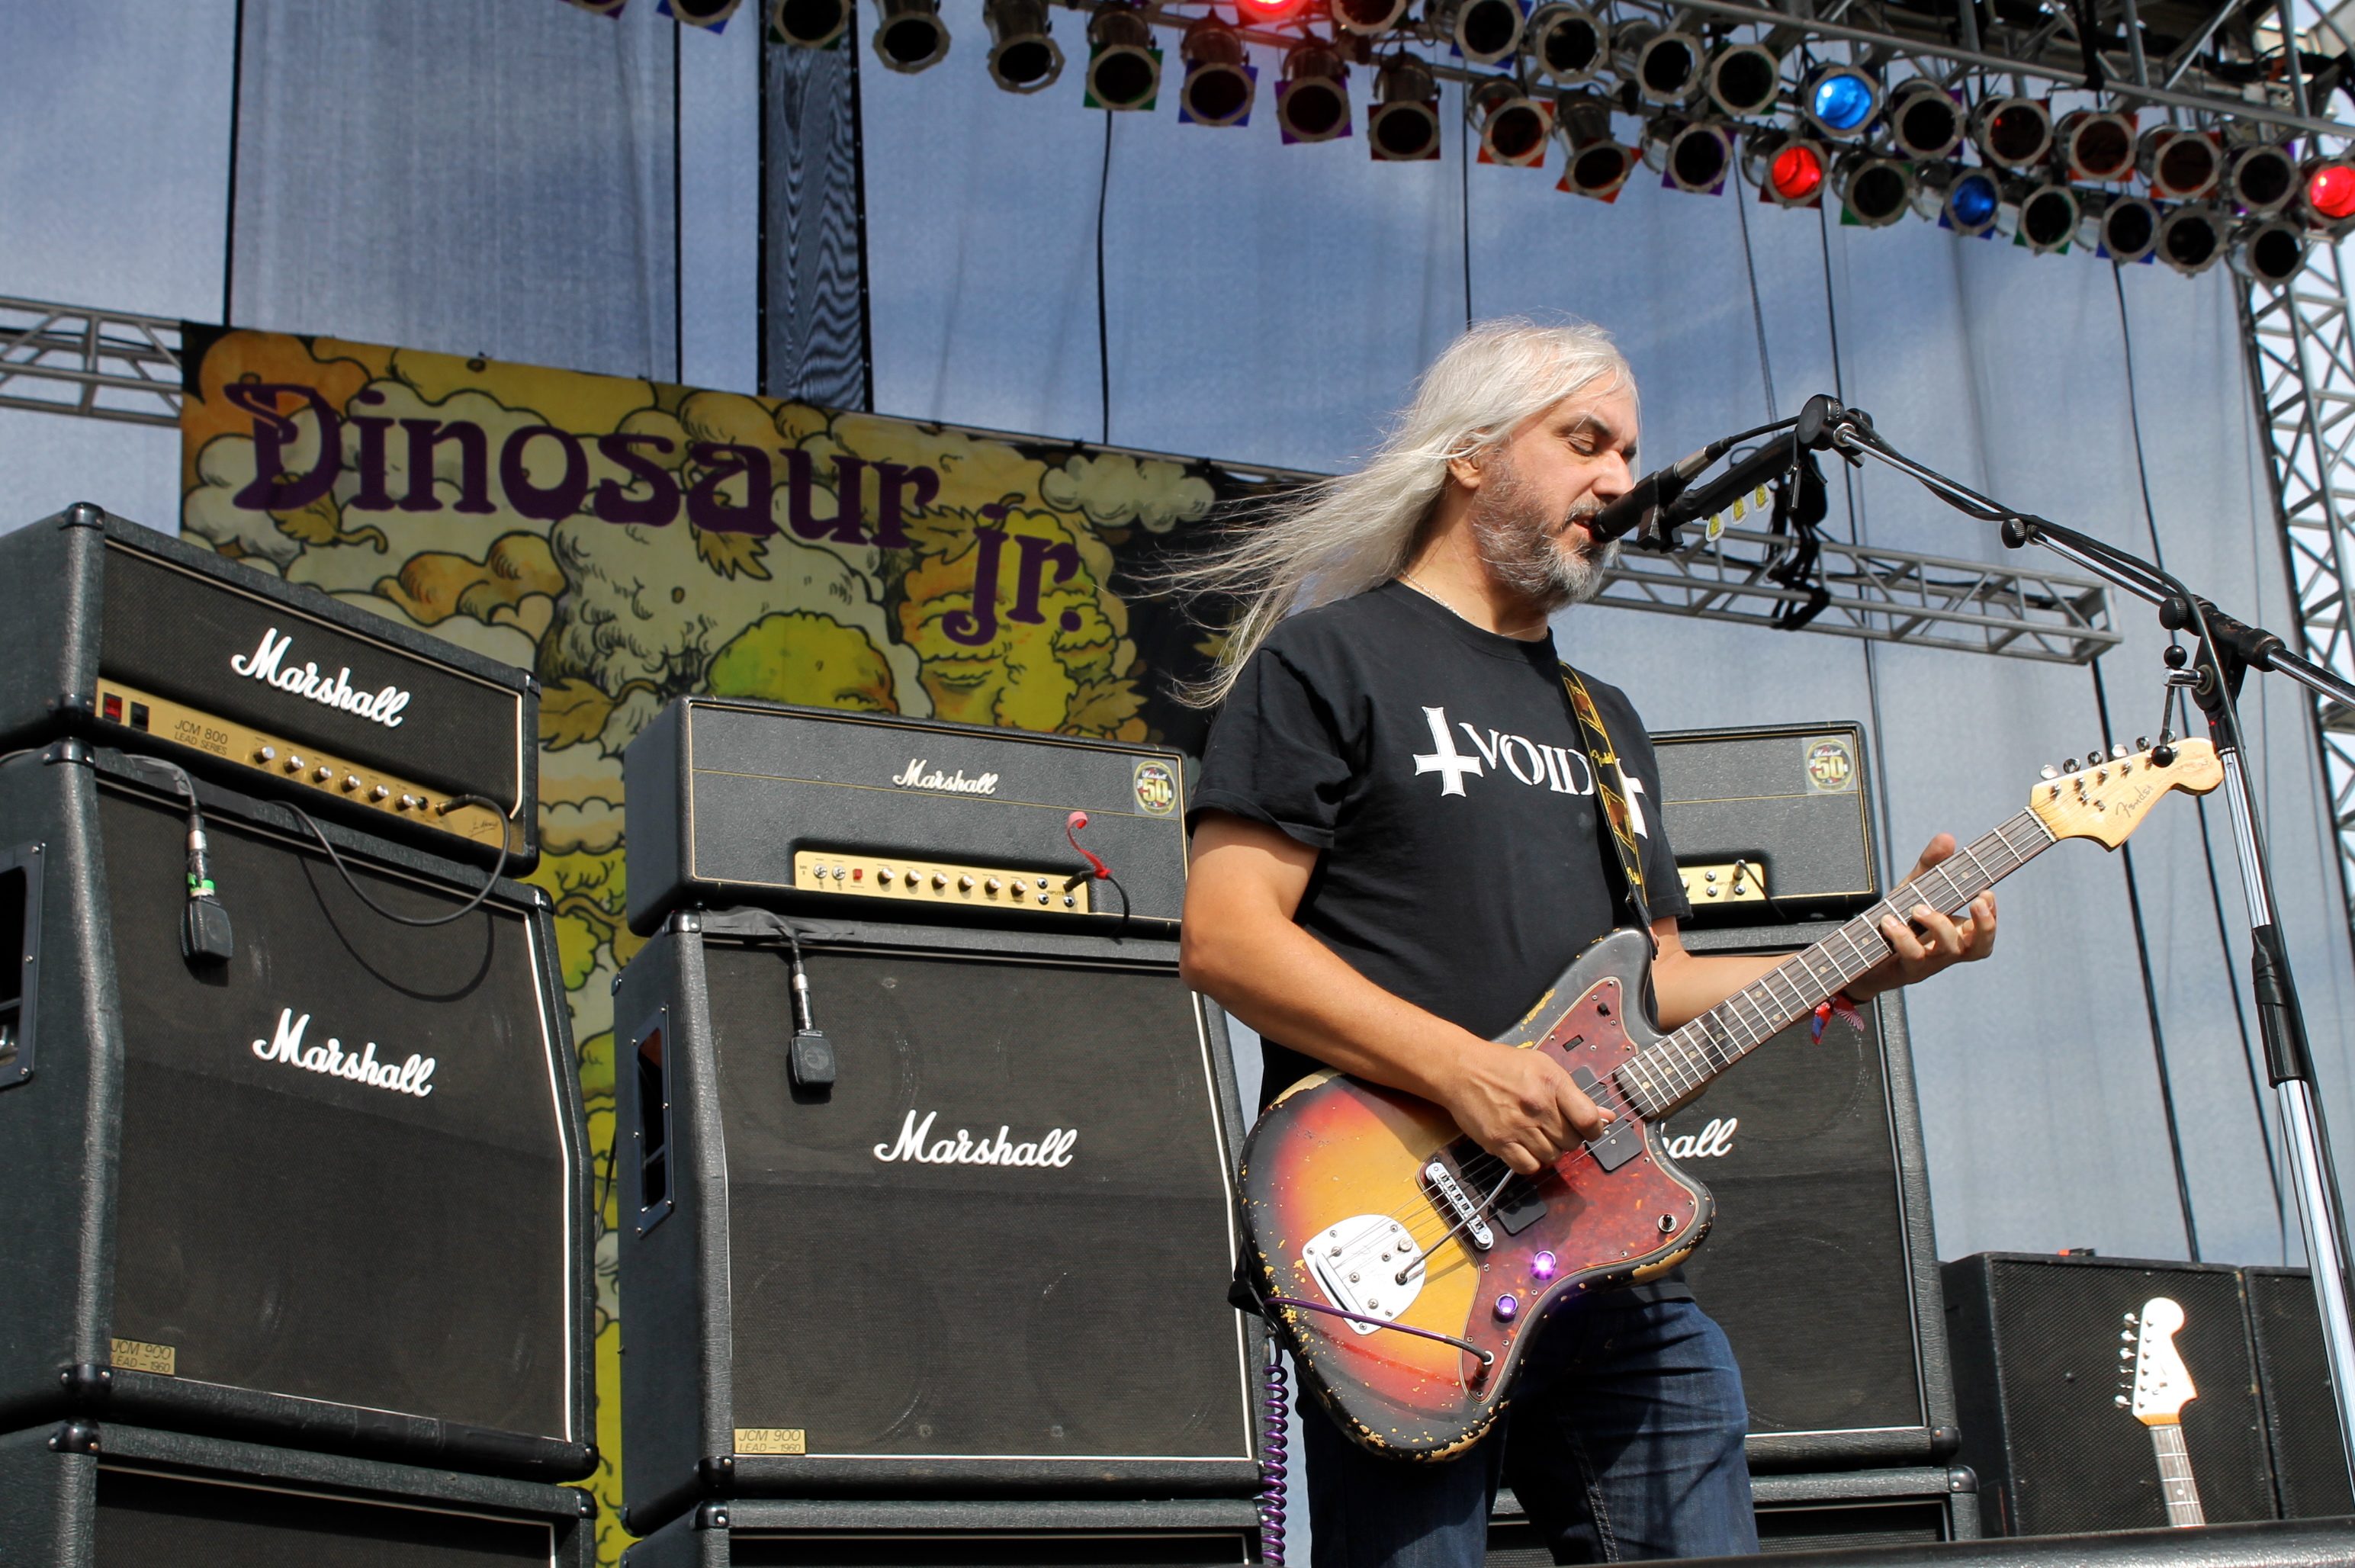 Watch J. Mascis of Dinosaur Jr., Robby Takac of Goo Goo Dolls, Members of ALL and Goldfinger Cover The Replacements' "Favorite Thing"